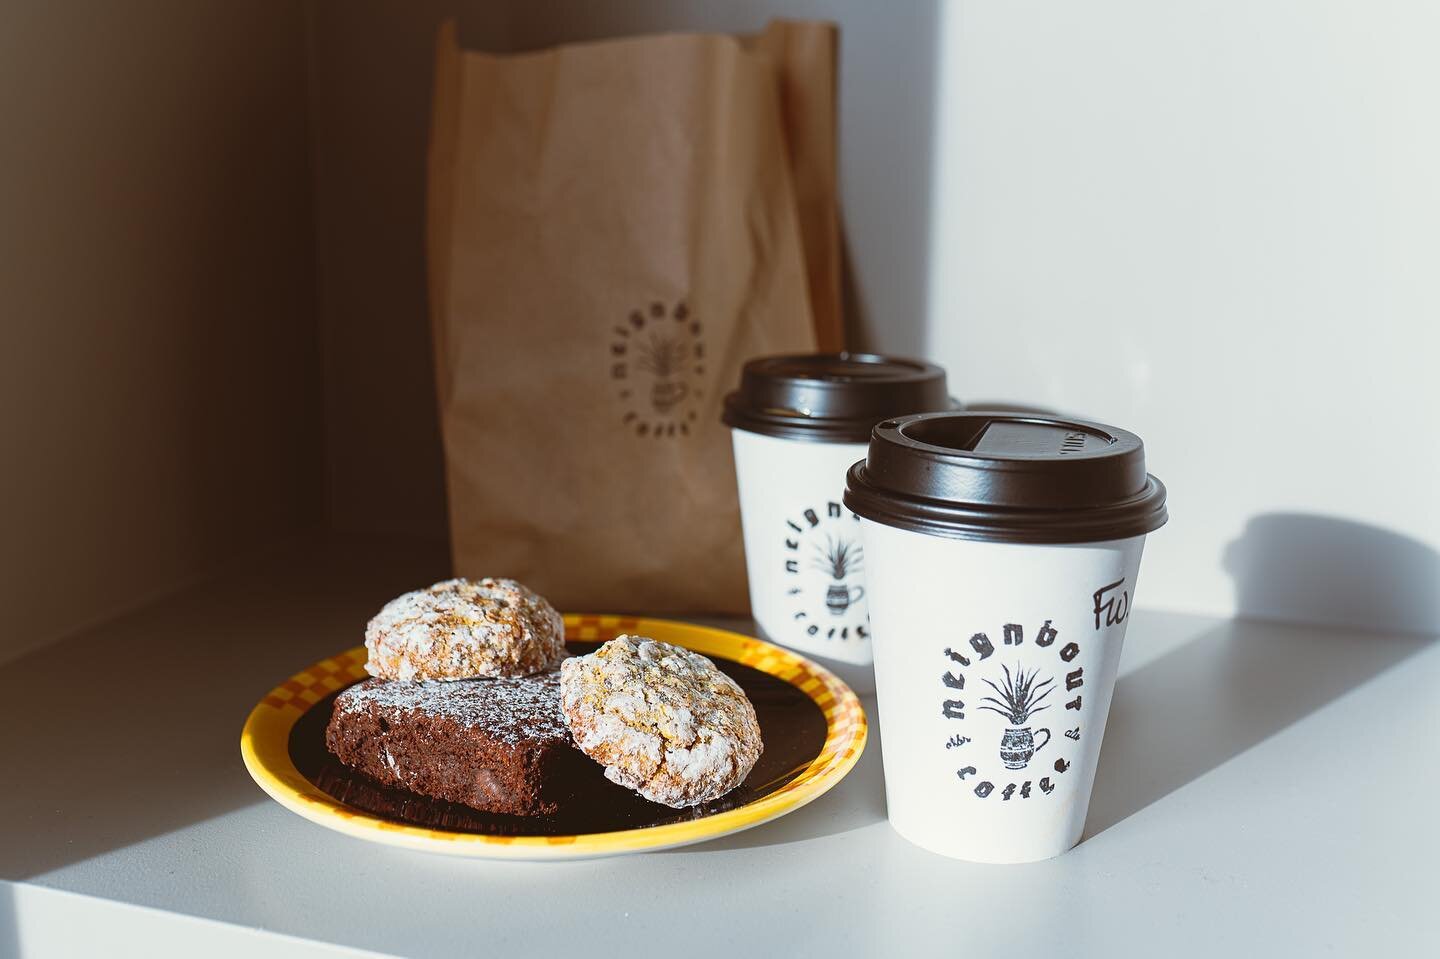 Building and living inner city means being surrounded by local businesses. Your routine changes from a drive through coffee to a walk down the street. We love @nhbrcoffee and they&rsquo;re one of the many joys of living in Altadore. 🤍
.
.
.
#calgary